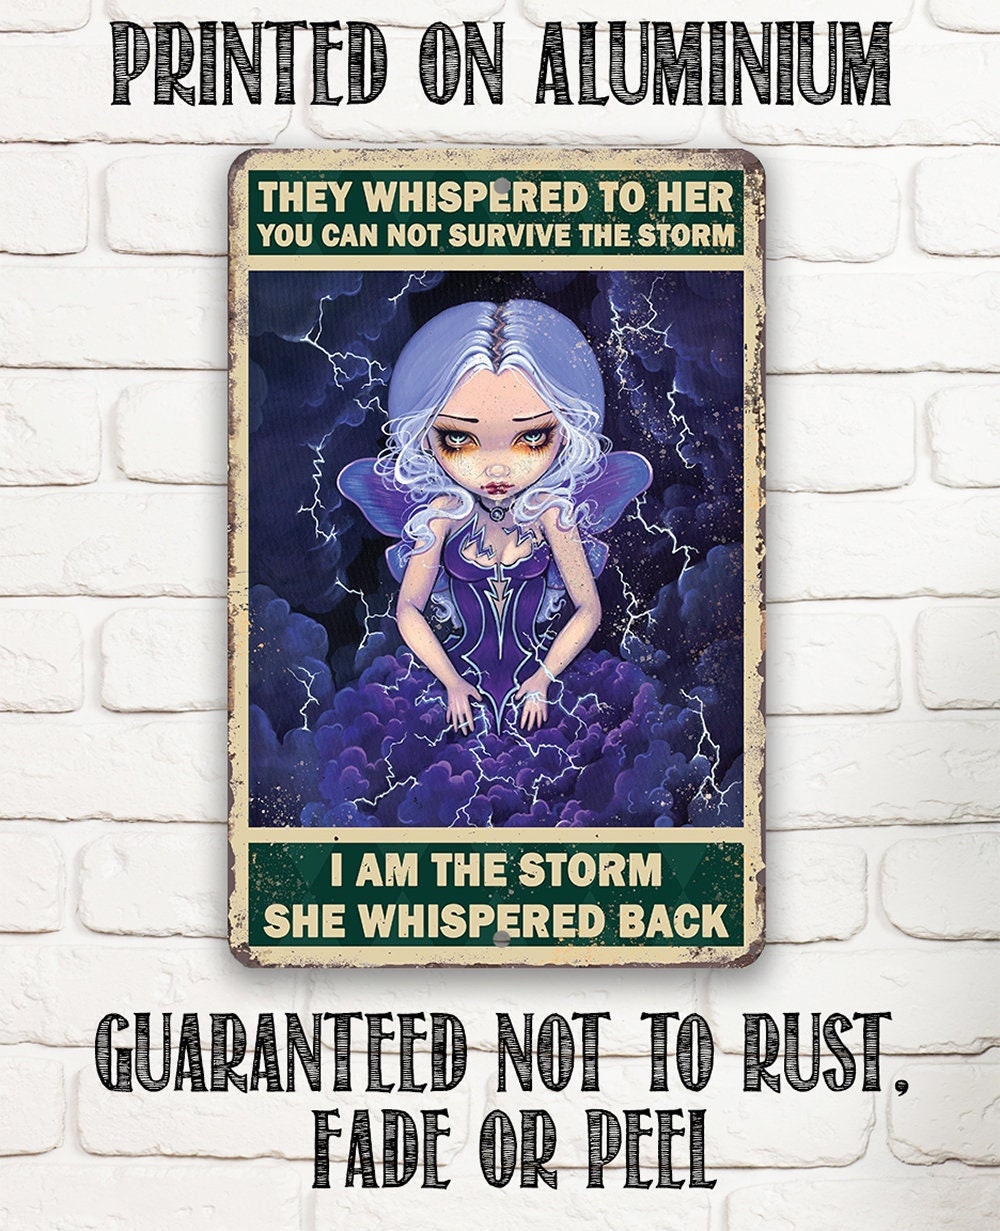 I am The Storm She Whispered Back - Metal Sign Metal Sign Lone Star Art 